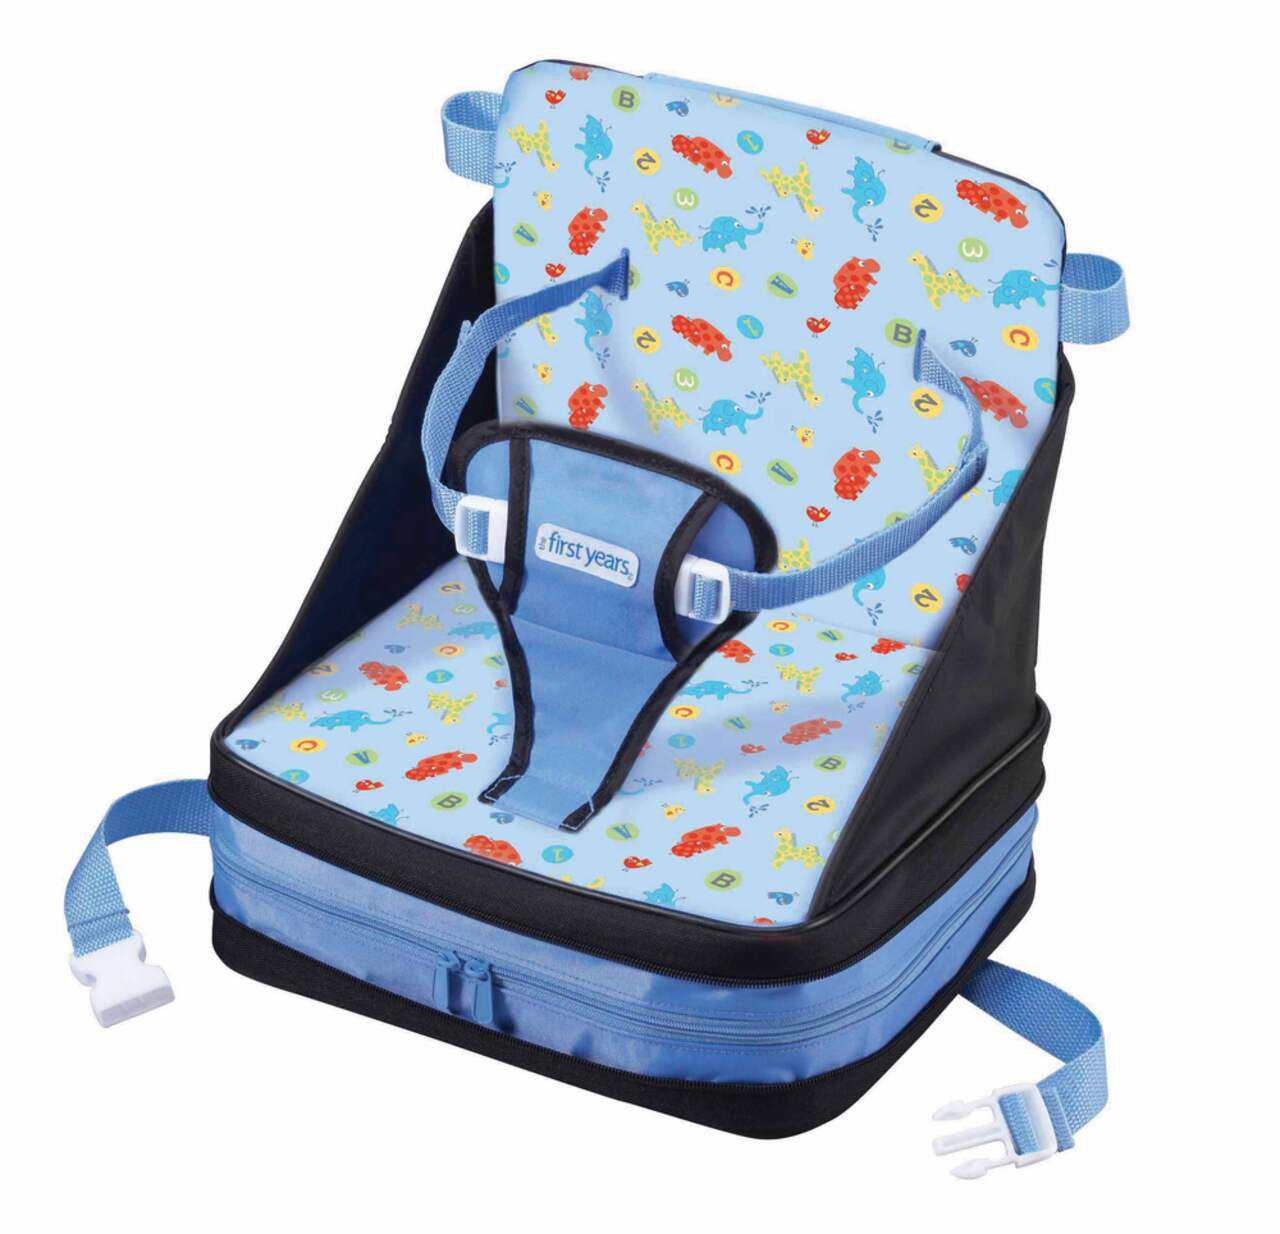 https://media-www.canadiantire.ca/product/automotive/car-care-accessories/child-travel-safety/0466619/tfyon-the-go-booster-seat-animal-fun-1b1e6d16-934c-45c3-97cf-c3631cd42fb9.png?imdensity=1&imwidth=640&impolicy=mZoom